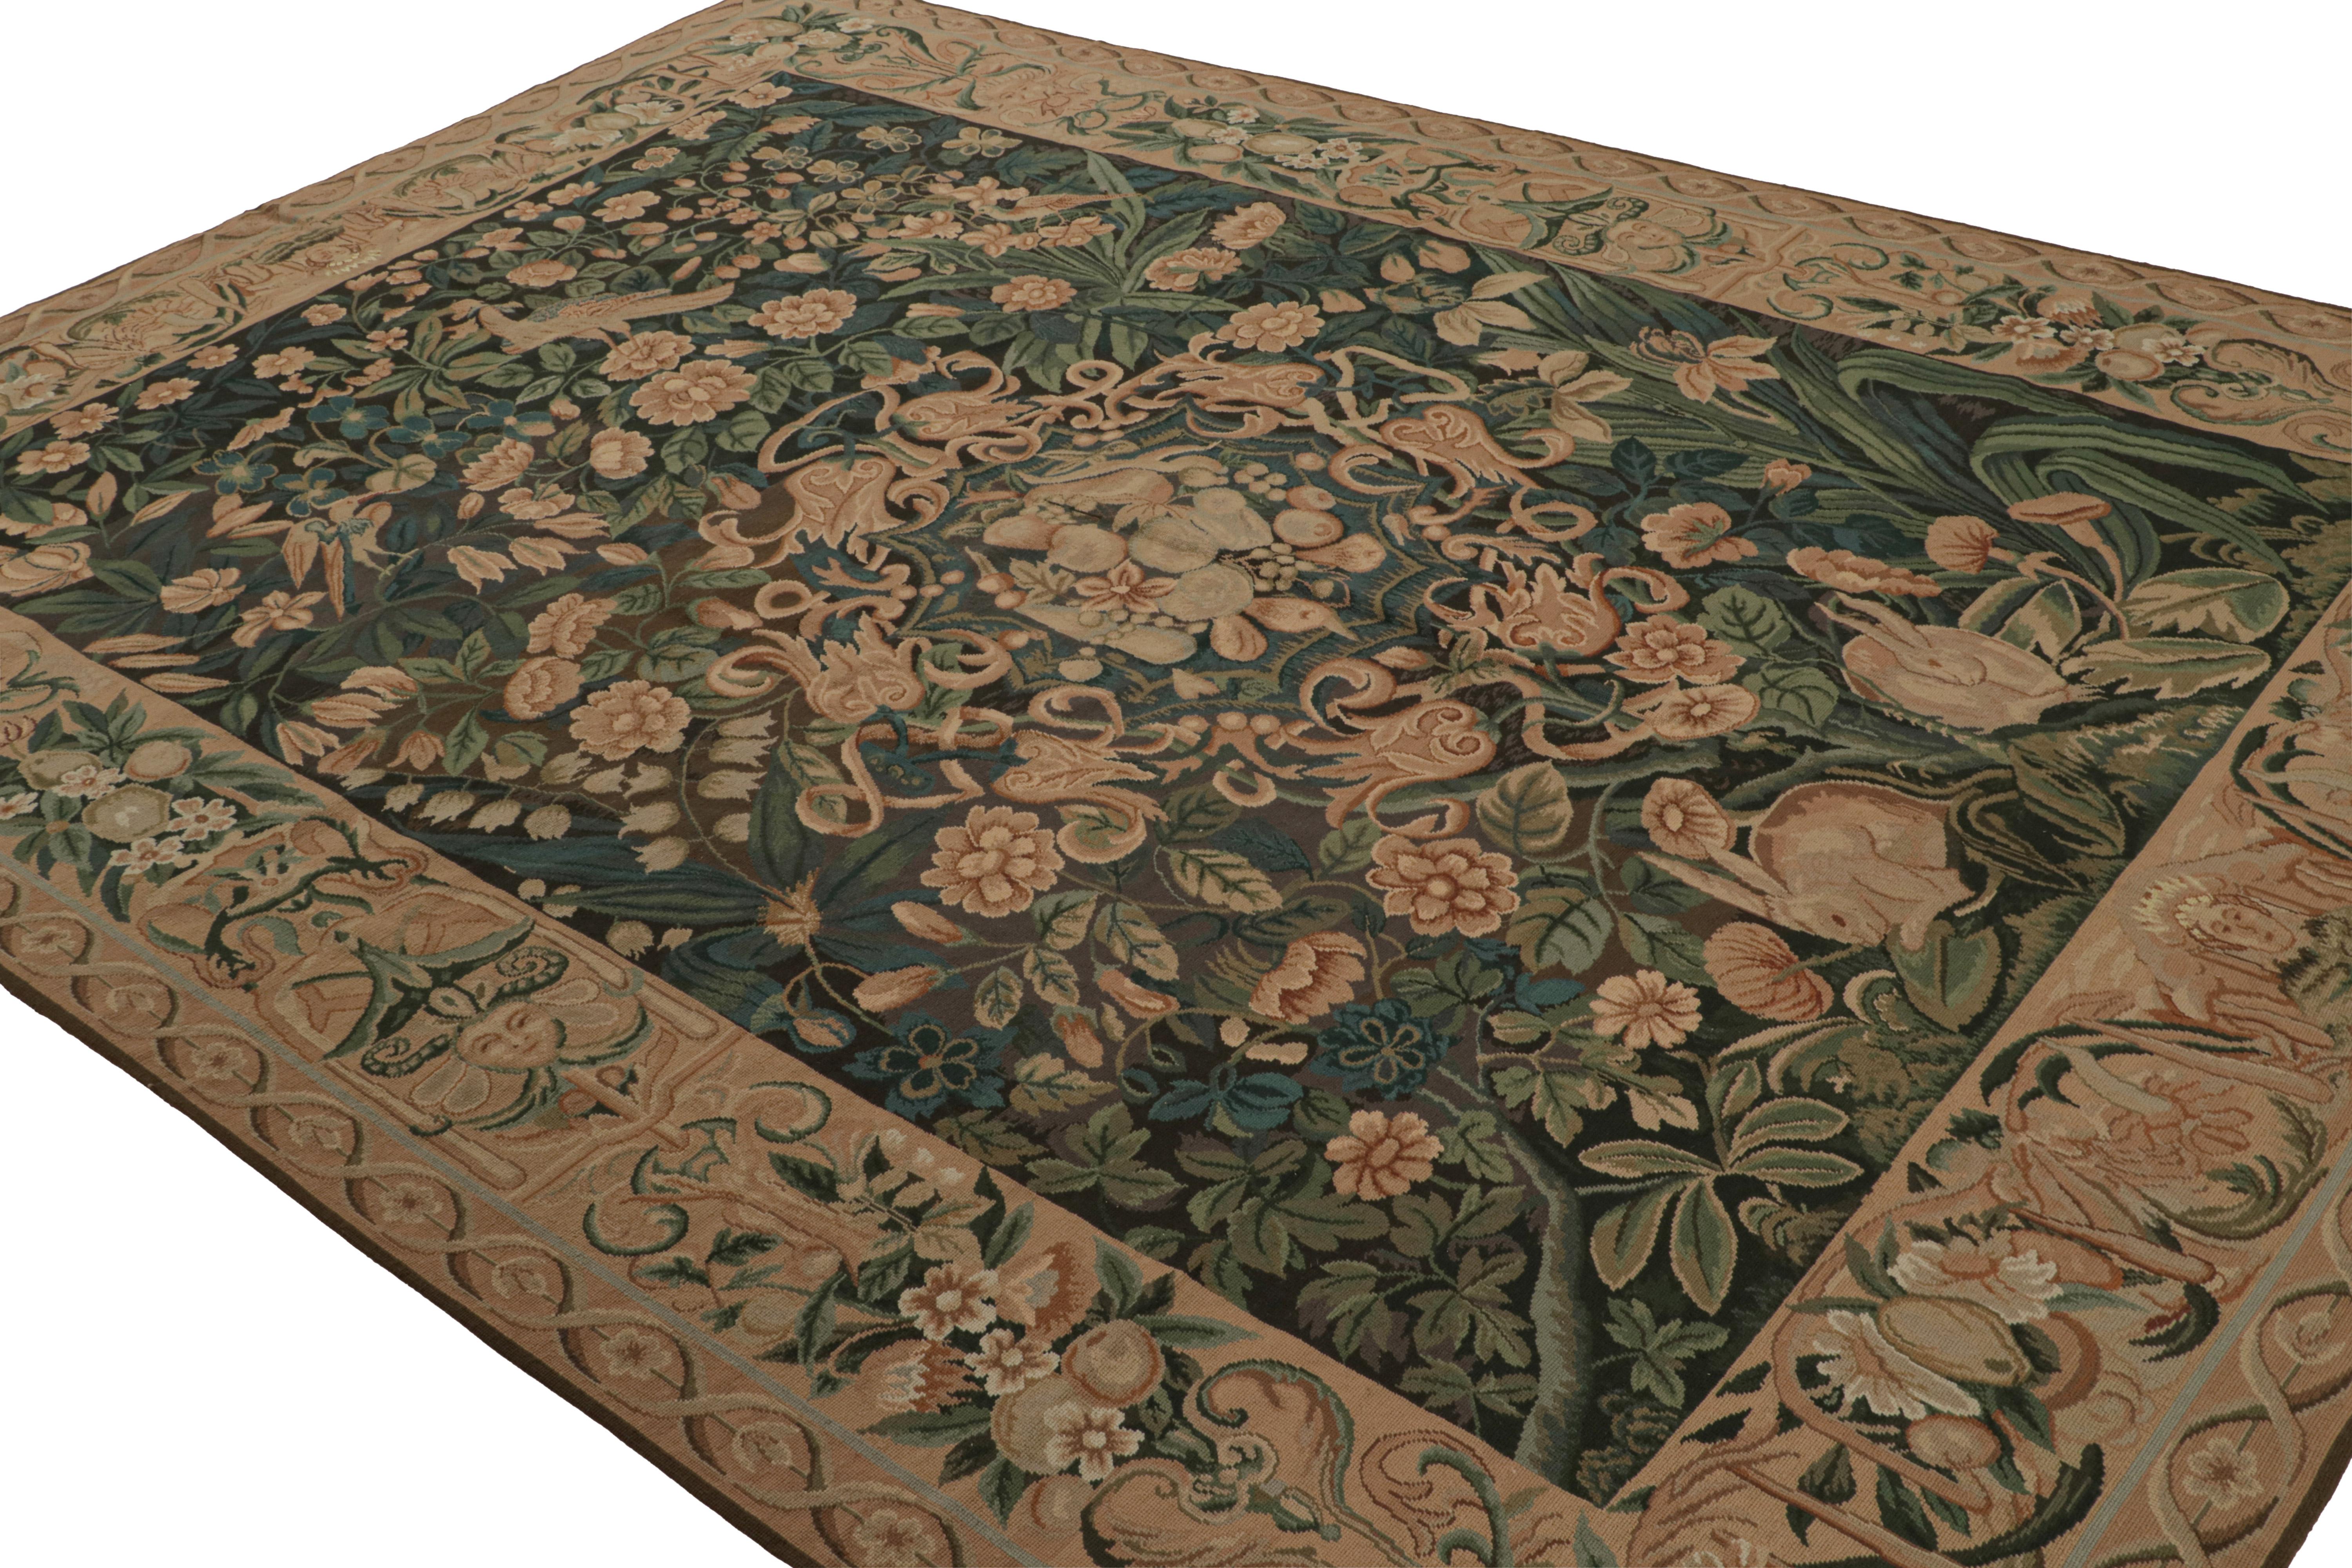 Hand-knotted in wool, this 8x11 European flatweave rug in brown features rich brown underscores and green, blue and beige floral patterns, with a terracotta accent befitting such an elegant old-world play of botanical and pictorial motifs. 

On the